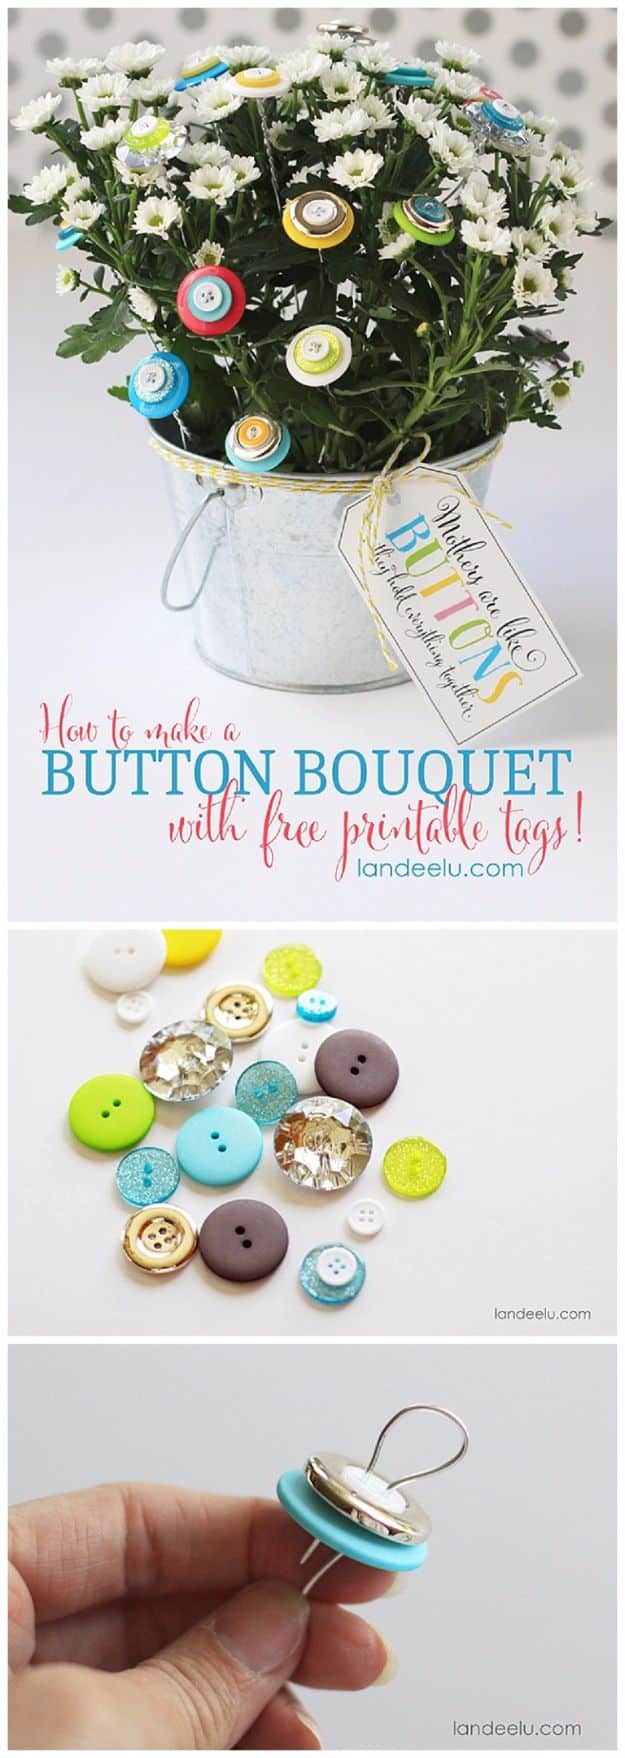 DIY Mothers Day Gift Ideas - Button Bouquet - Homemade Gifts for Moms - Crafts and Do It Yourself Home Decor, Accessories and Fashion To Make For Mom - Mothers Love Handmade Presents on Mother's Day - DIY Projects and Crafts by DIY JOY 